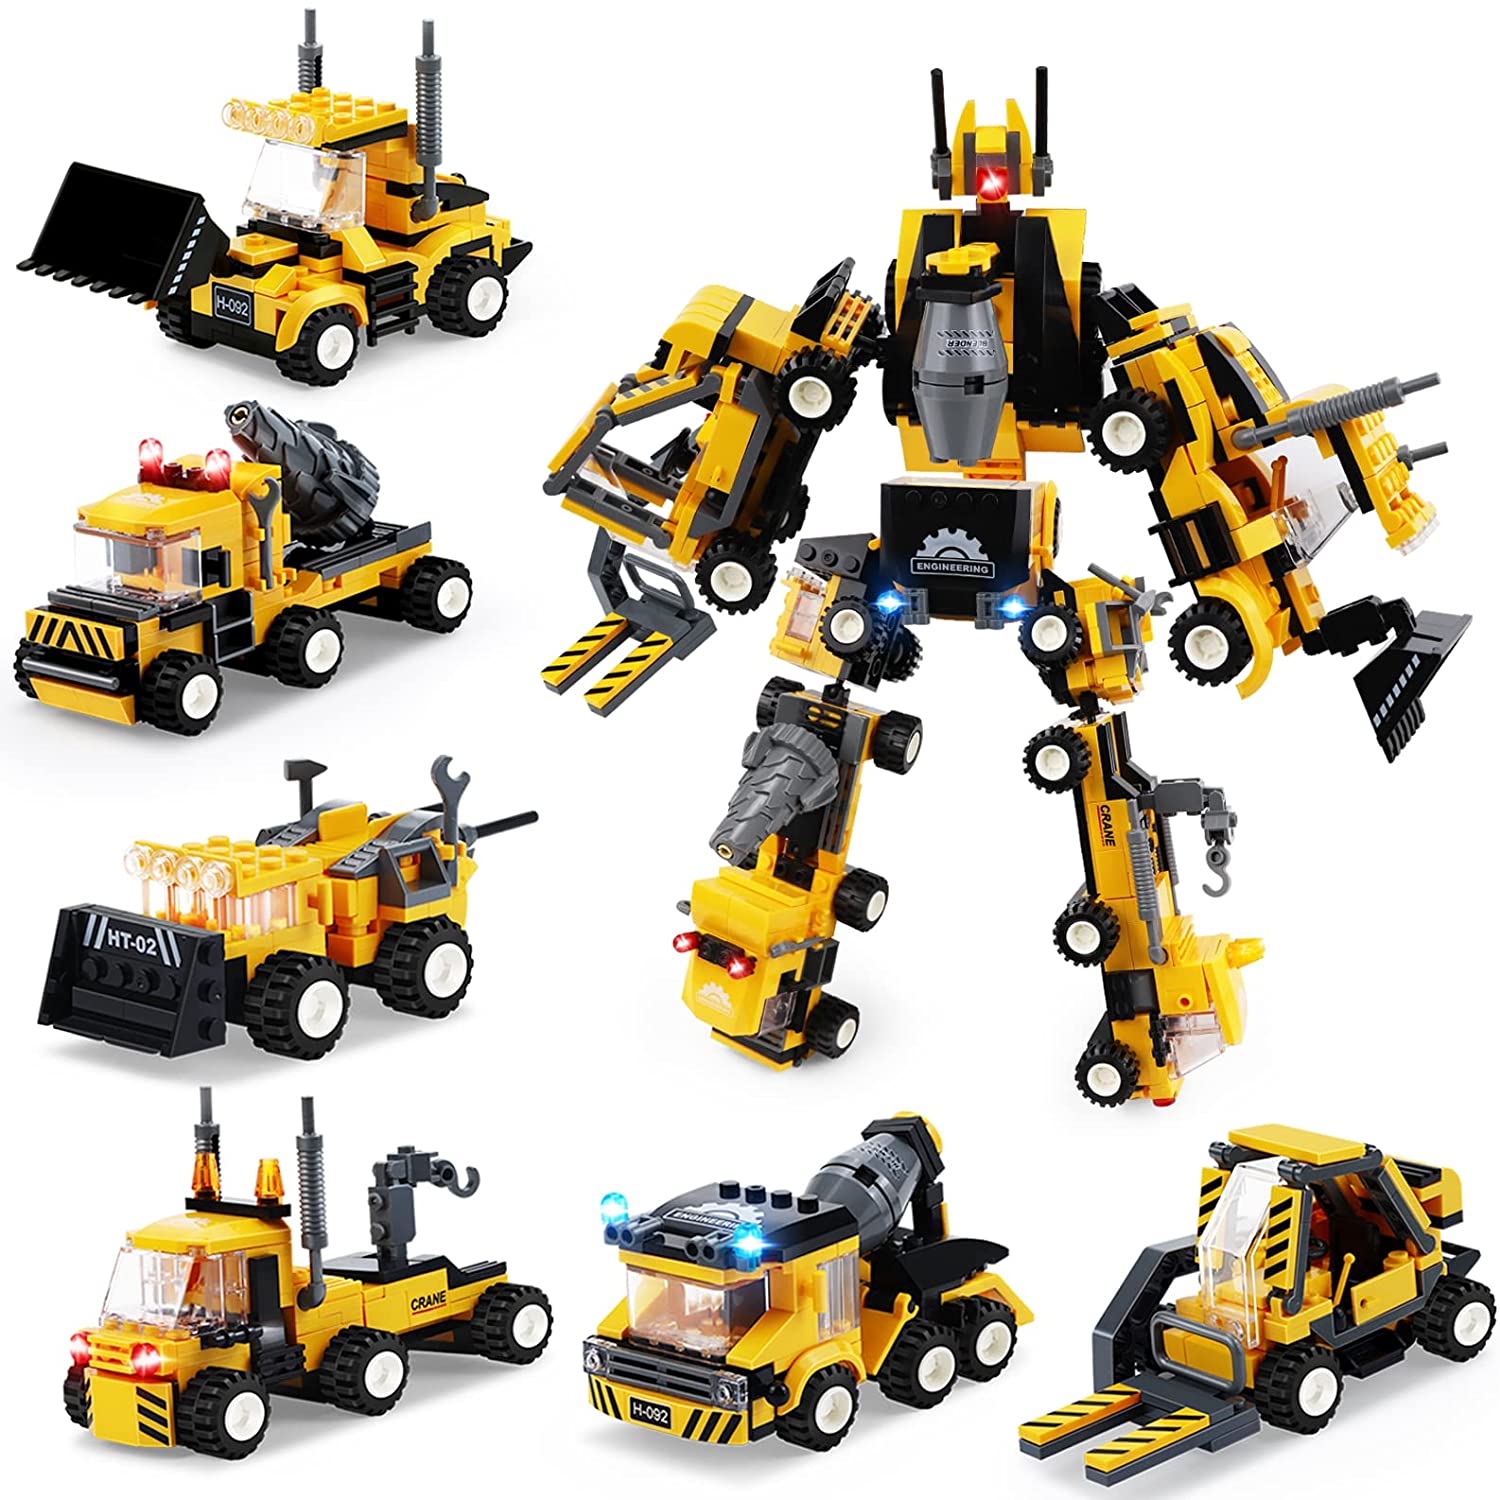 MOONTOY STEM Building Toys,718PCS Robot Building Kit for Kids 6-12,6 in 1  Engineering Building Bricks Construction Vehicle Truck Educational Toys 